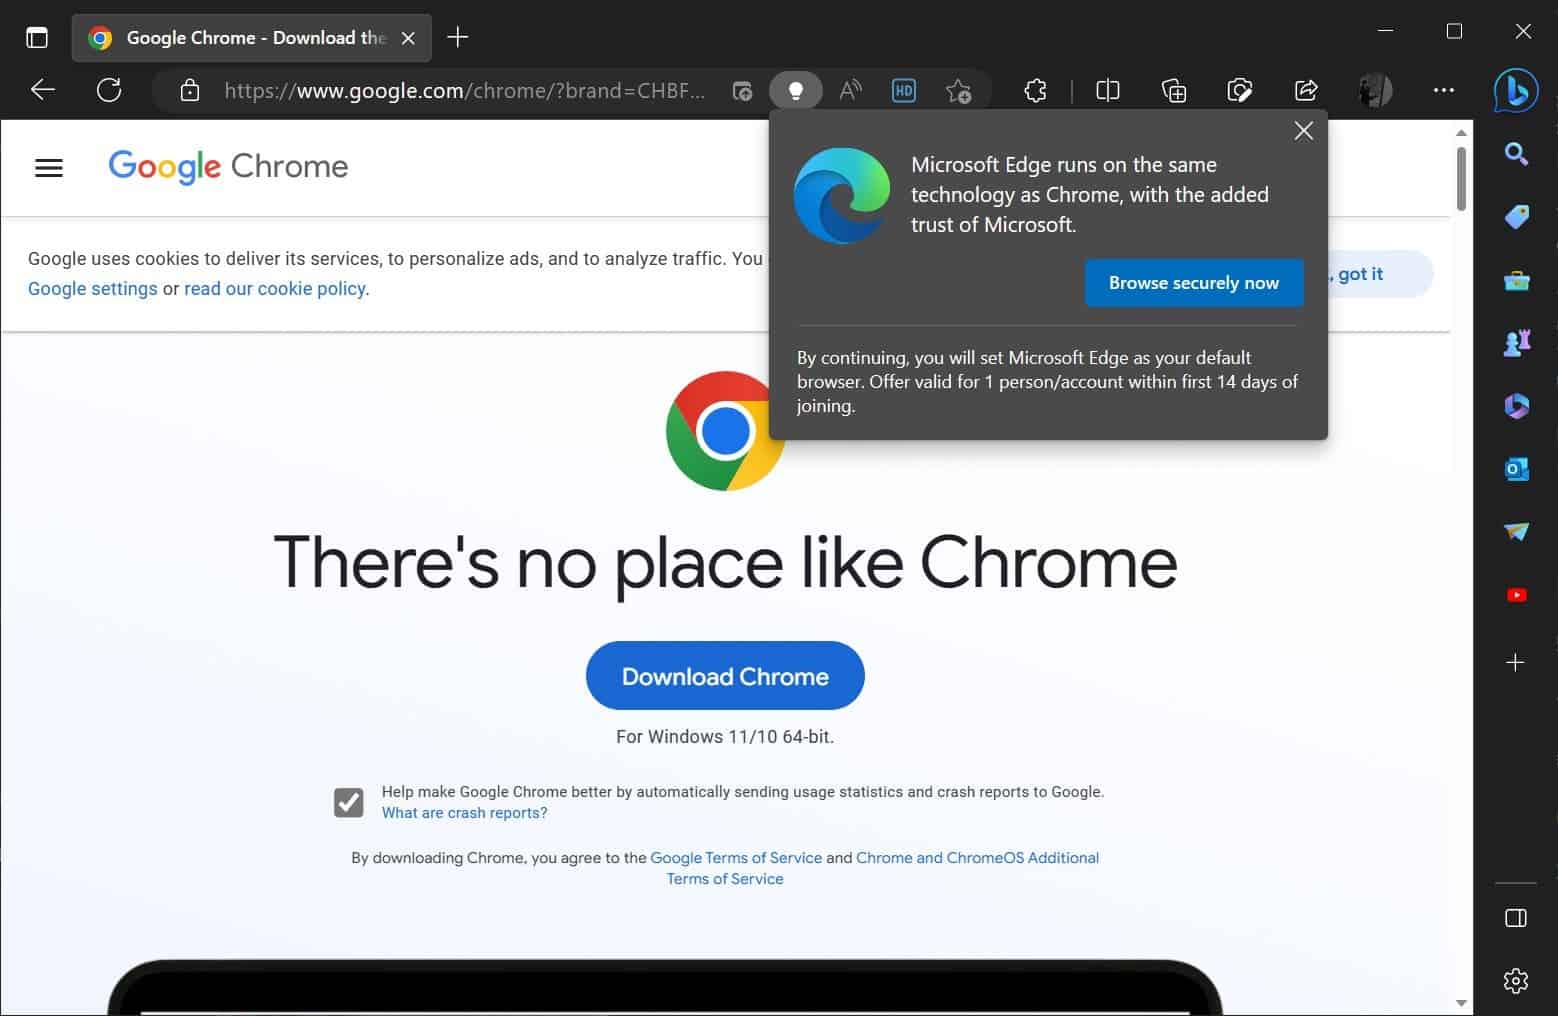 Switch Browsers from Chrome to Edge to Receive Payment from Microsoft